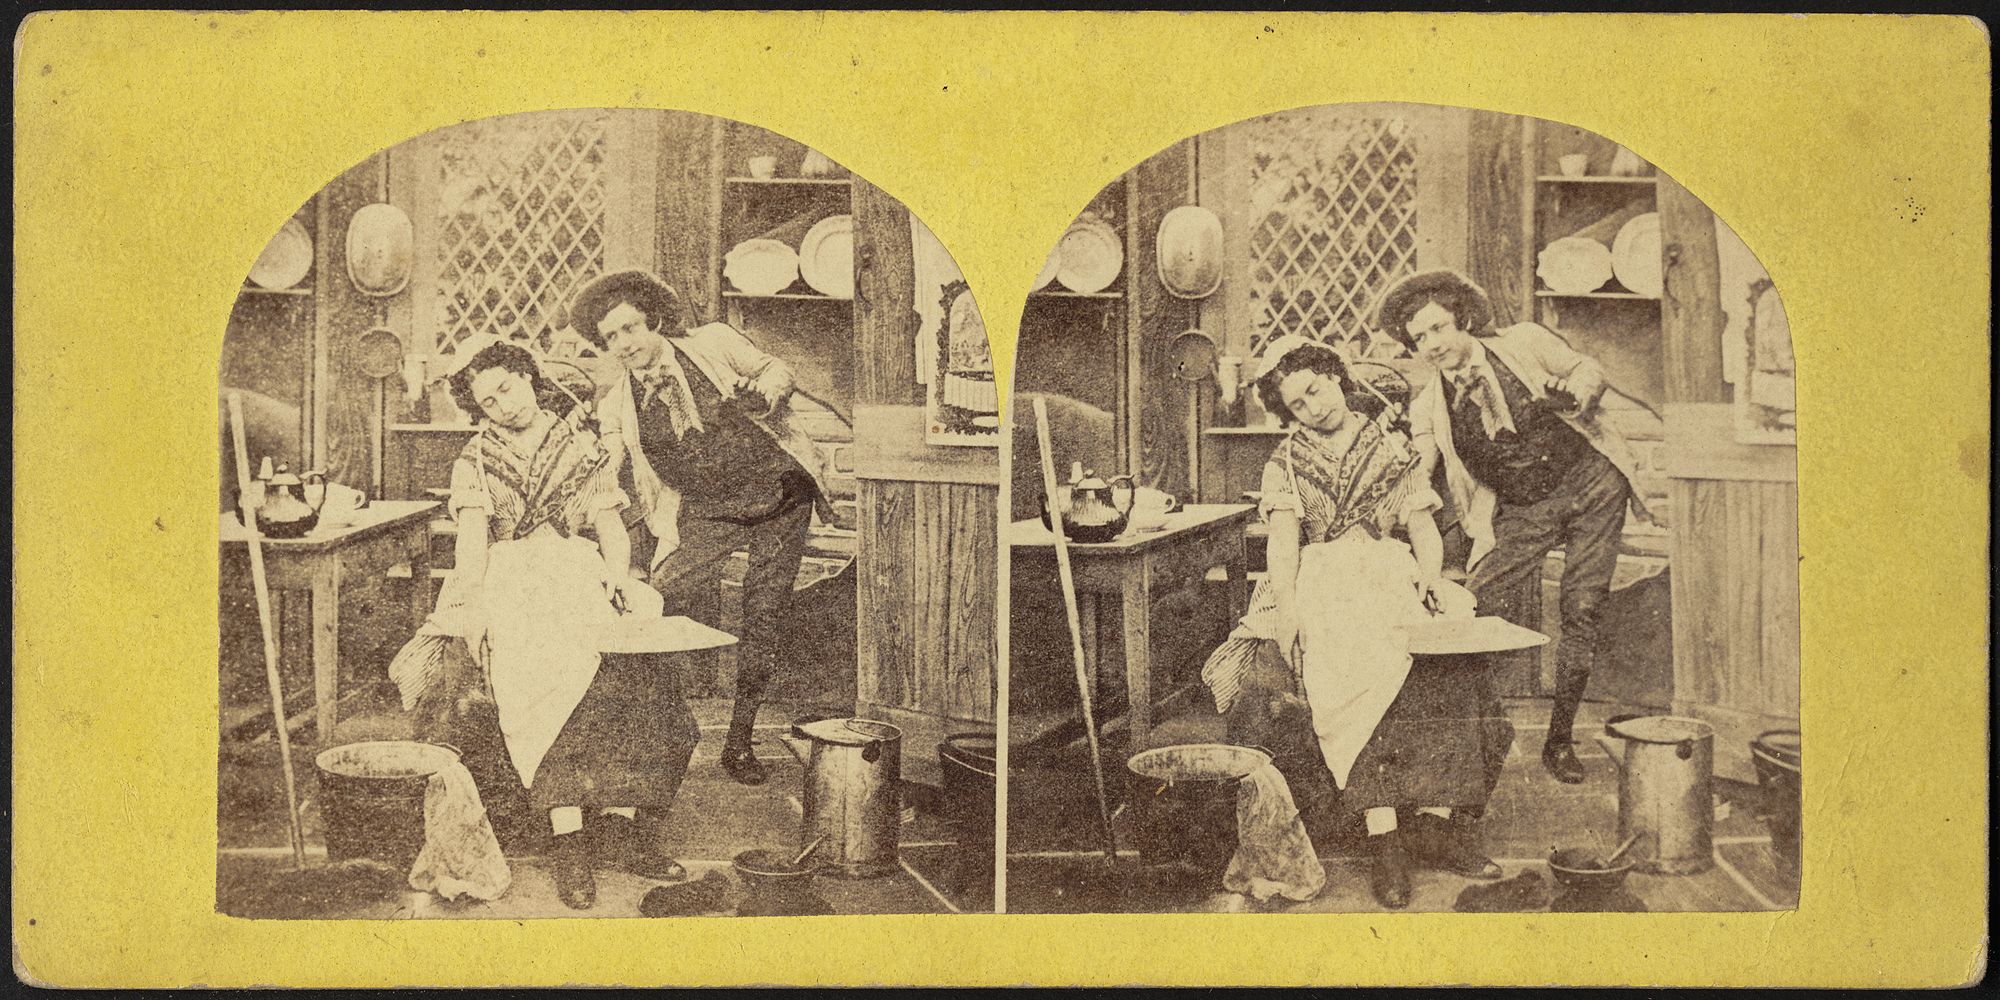 two old fashion images of men and women in kitchen